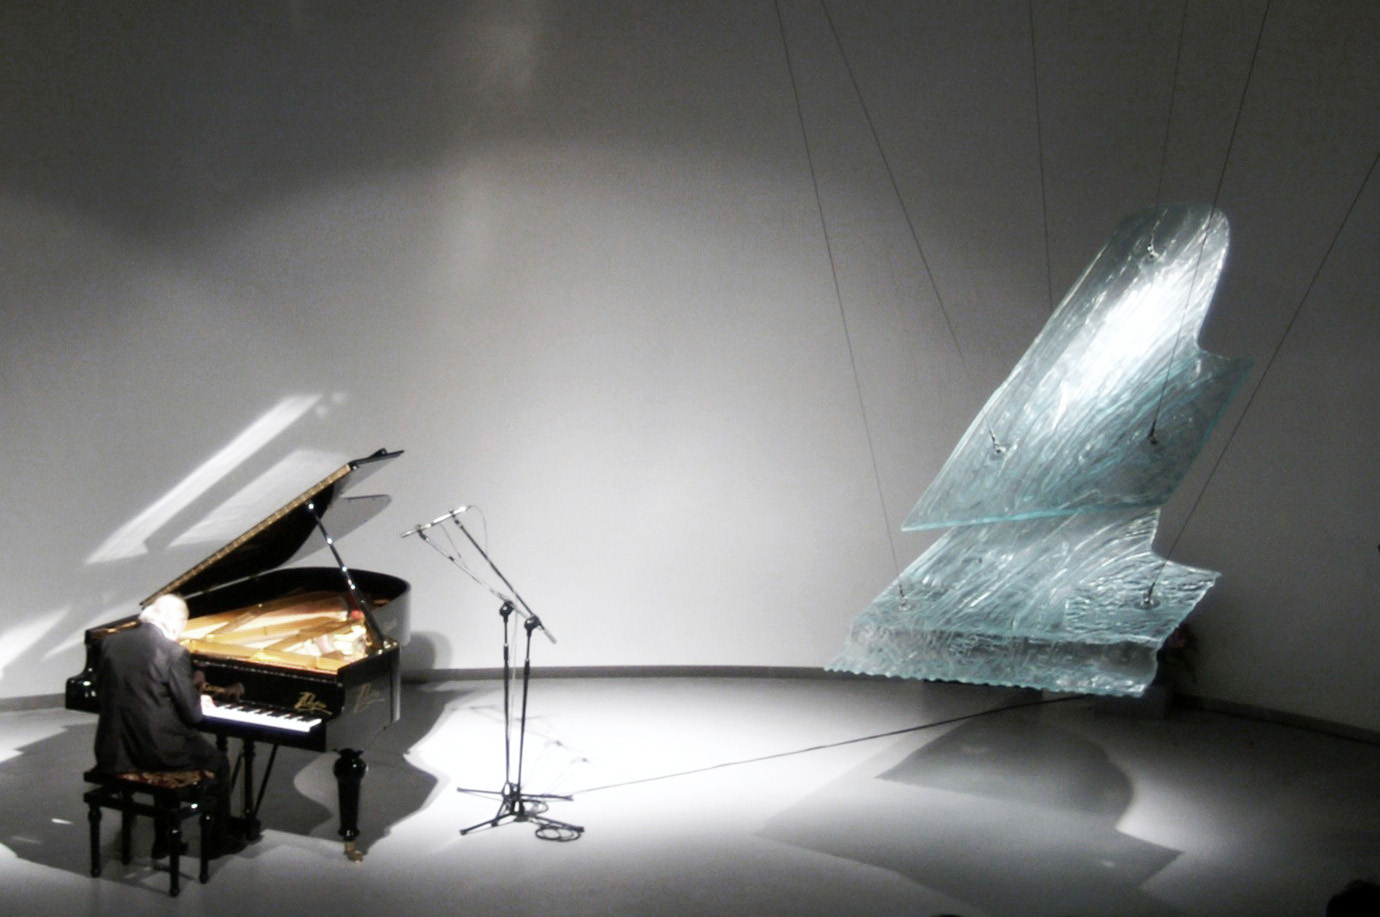 “The Spirit of the Piano”, Pavilion of Poland at EXPO 2005 in Japan